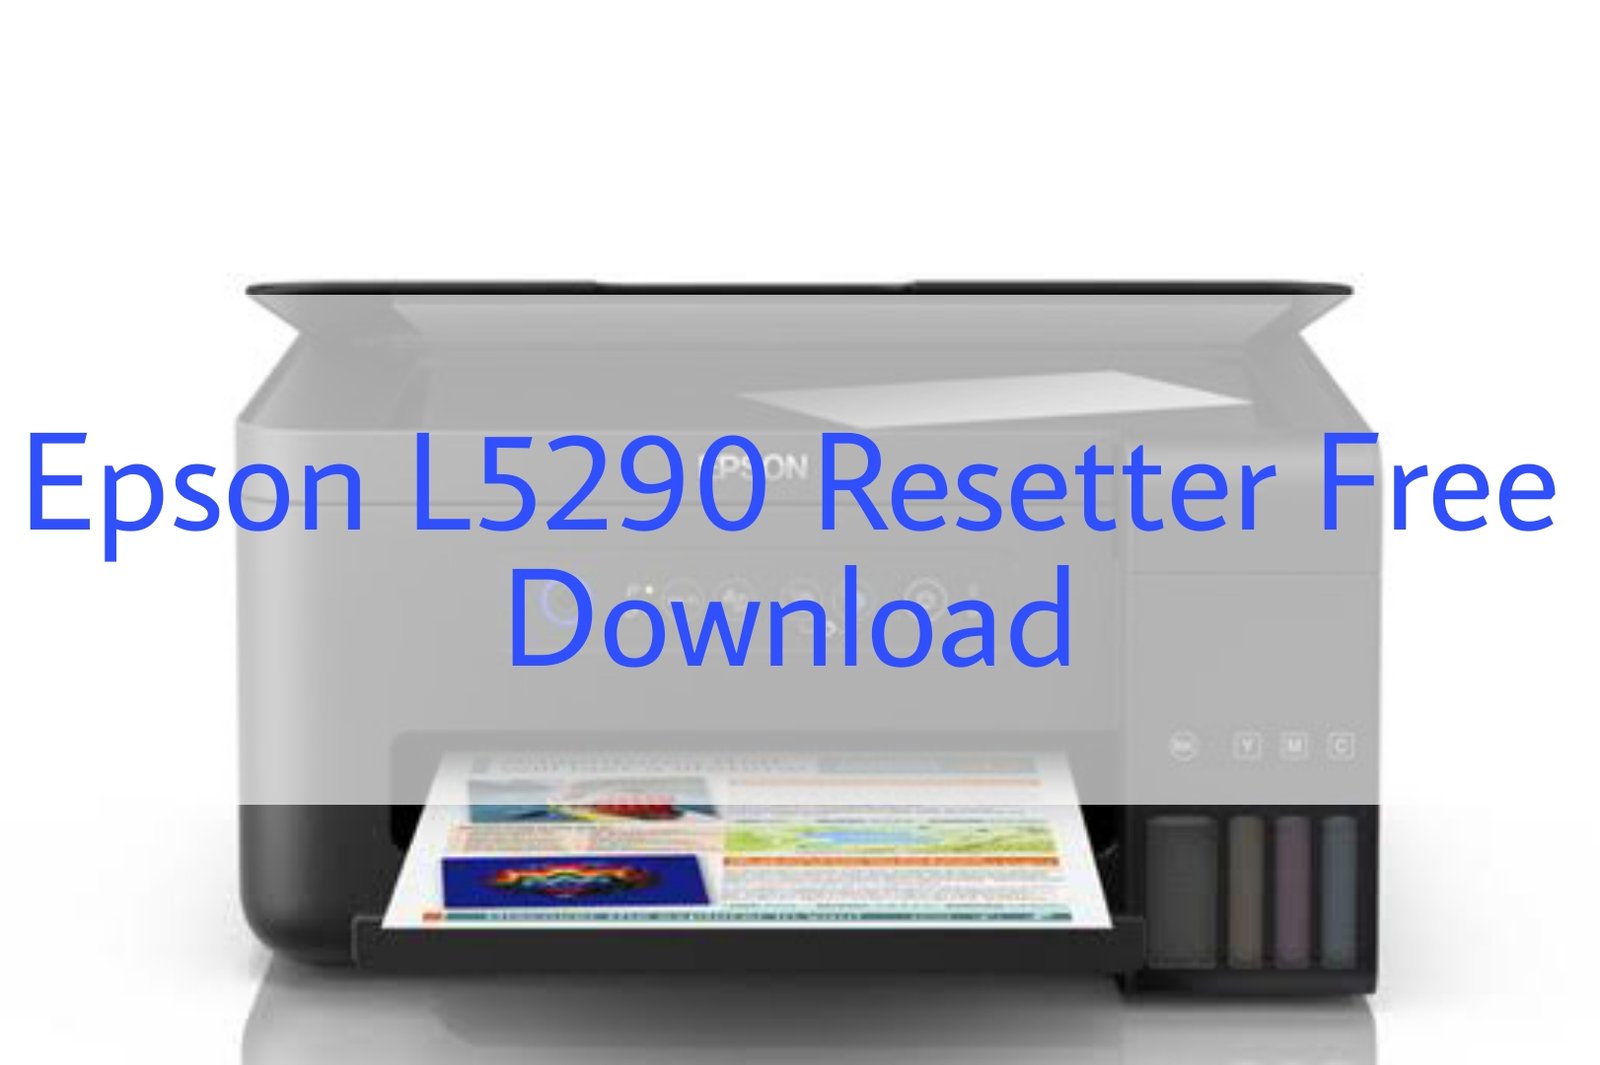 Epson L5290 Resetter Free Download 5056